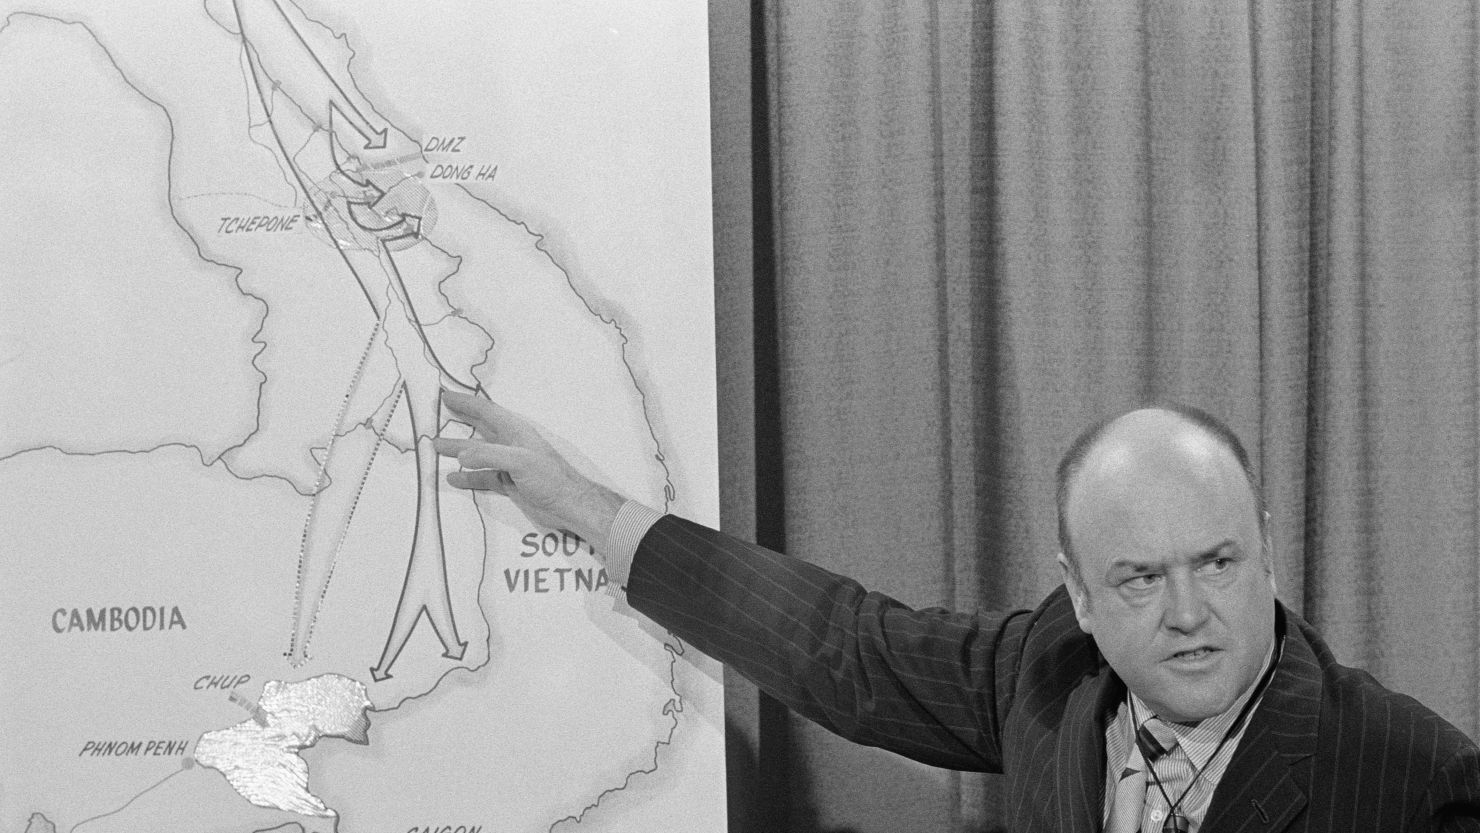 During a news briefing at the Pentagon, Secretary of Defense Melvin Laird points to a location in Laos on a map of Indochina. (Photo by © Wally McNamee/CORBIS/Corbis via Getty Images)